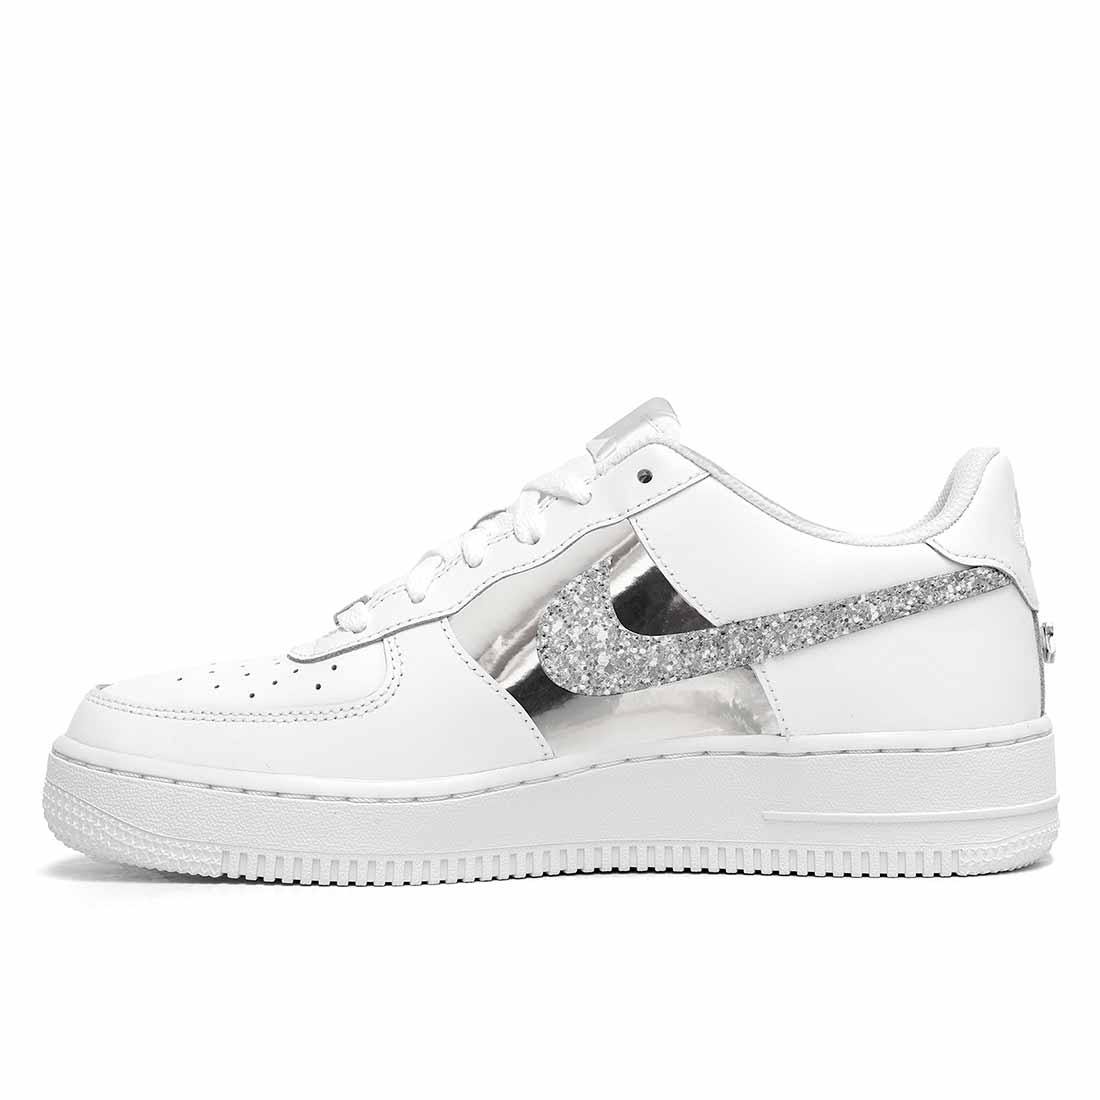 nike air force bianche con glitter argento